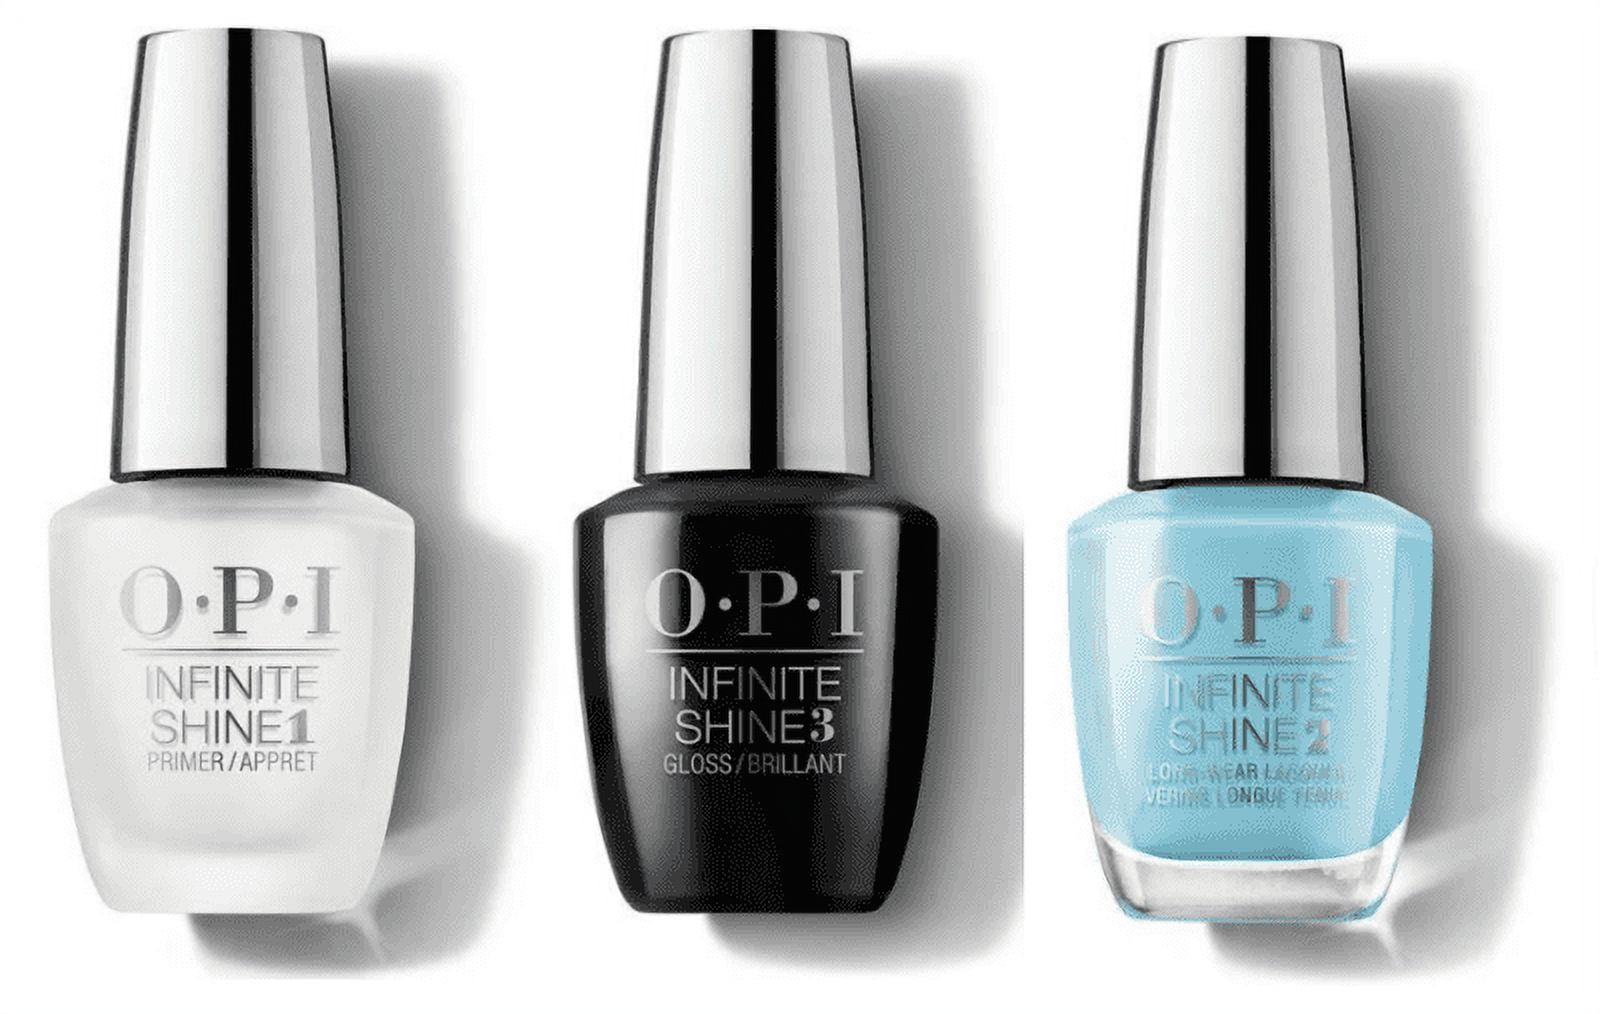 7. OPI Infinite Shine in "To Infinity & Blue-yond" - wide 7